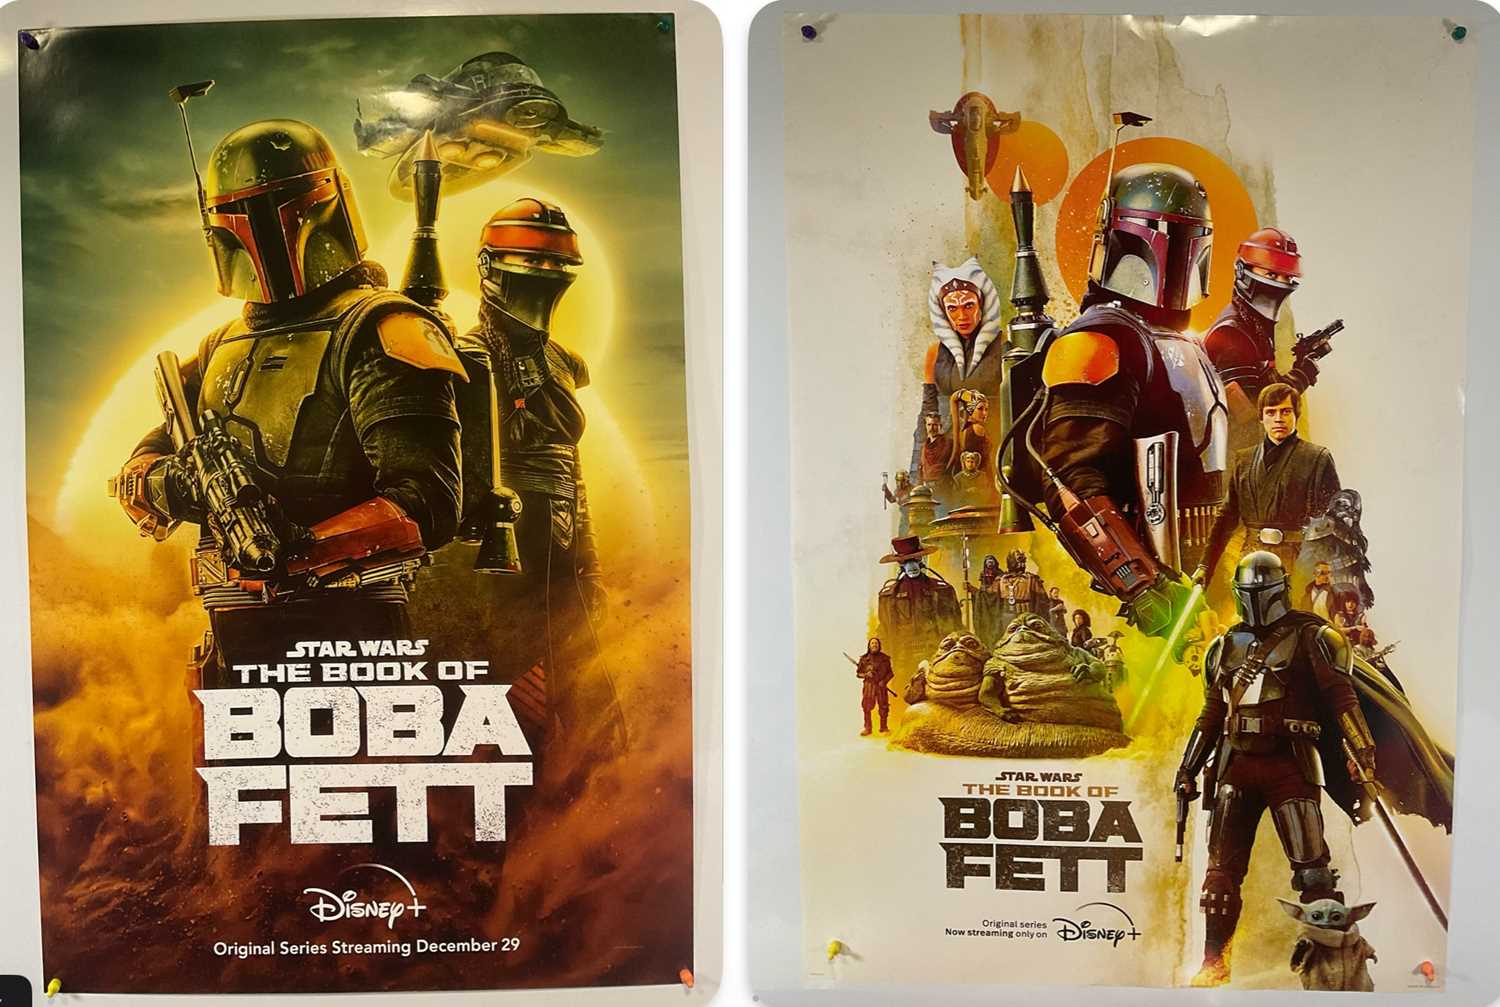 THE BOOK OF BOBA FETT (2022) US advance and regular one sheet film posters, Disney plus STAR WARS TV